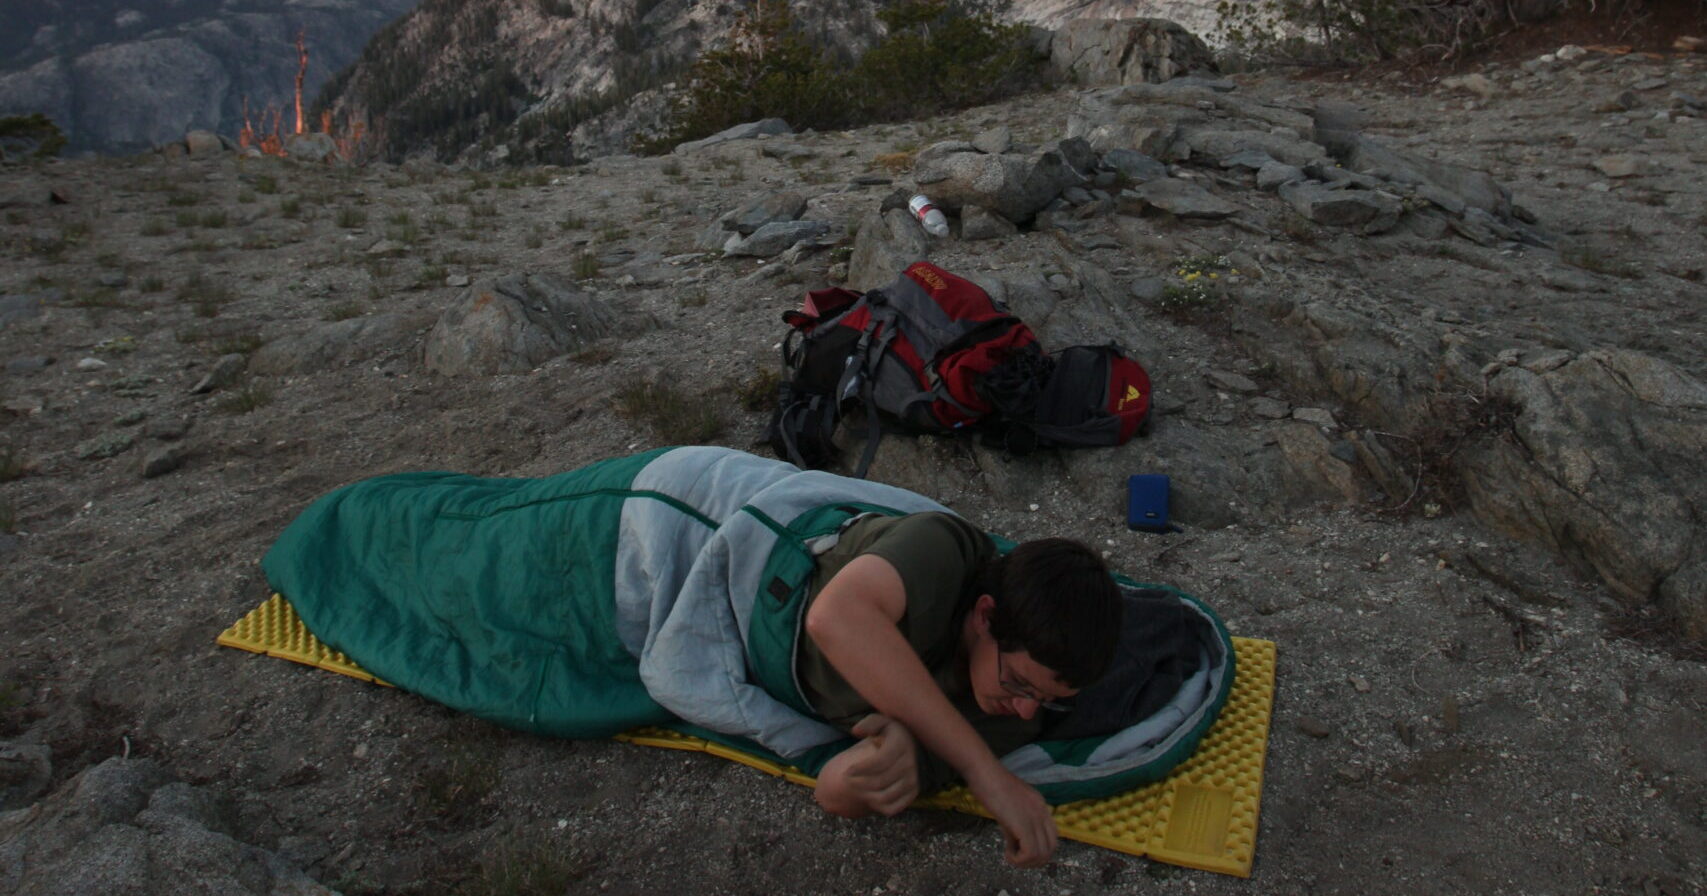 From the Scouting magazine archives: Experience nature in a new way by not pitching a tent